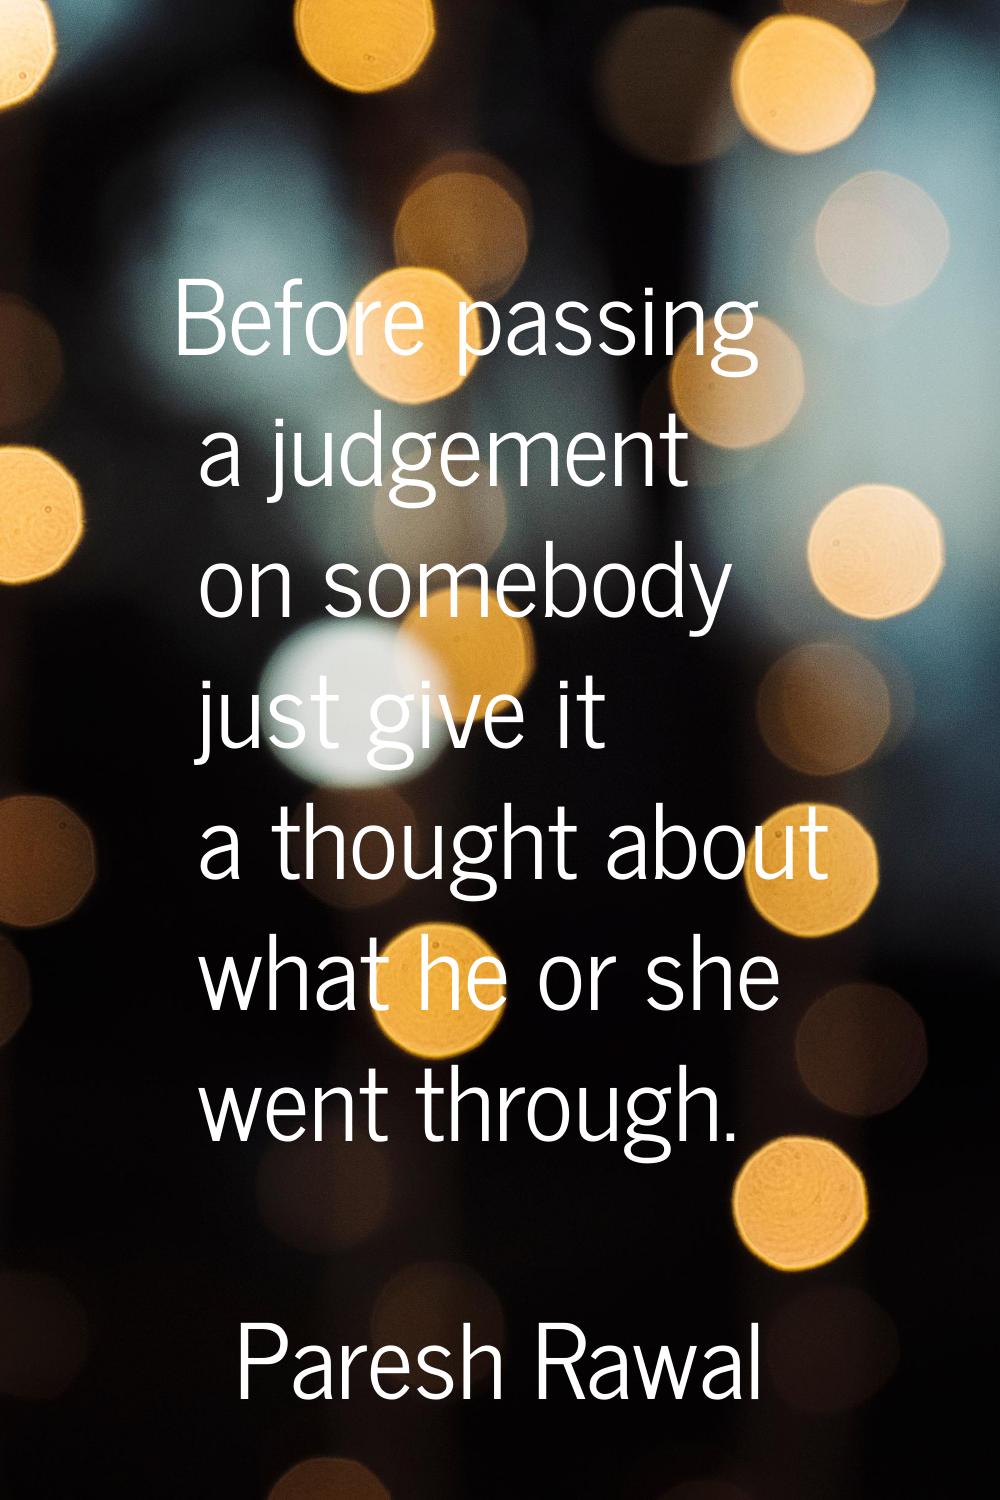 Before passing a judgement on somebody just give it a thought about what he or she went through.